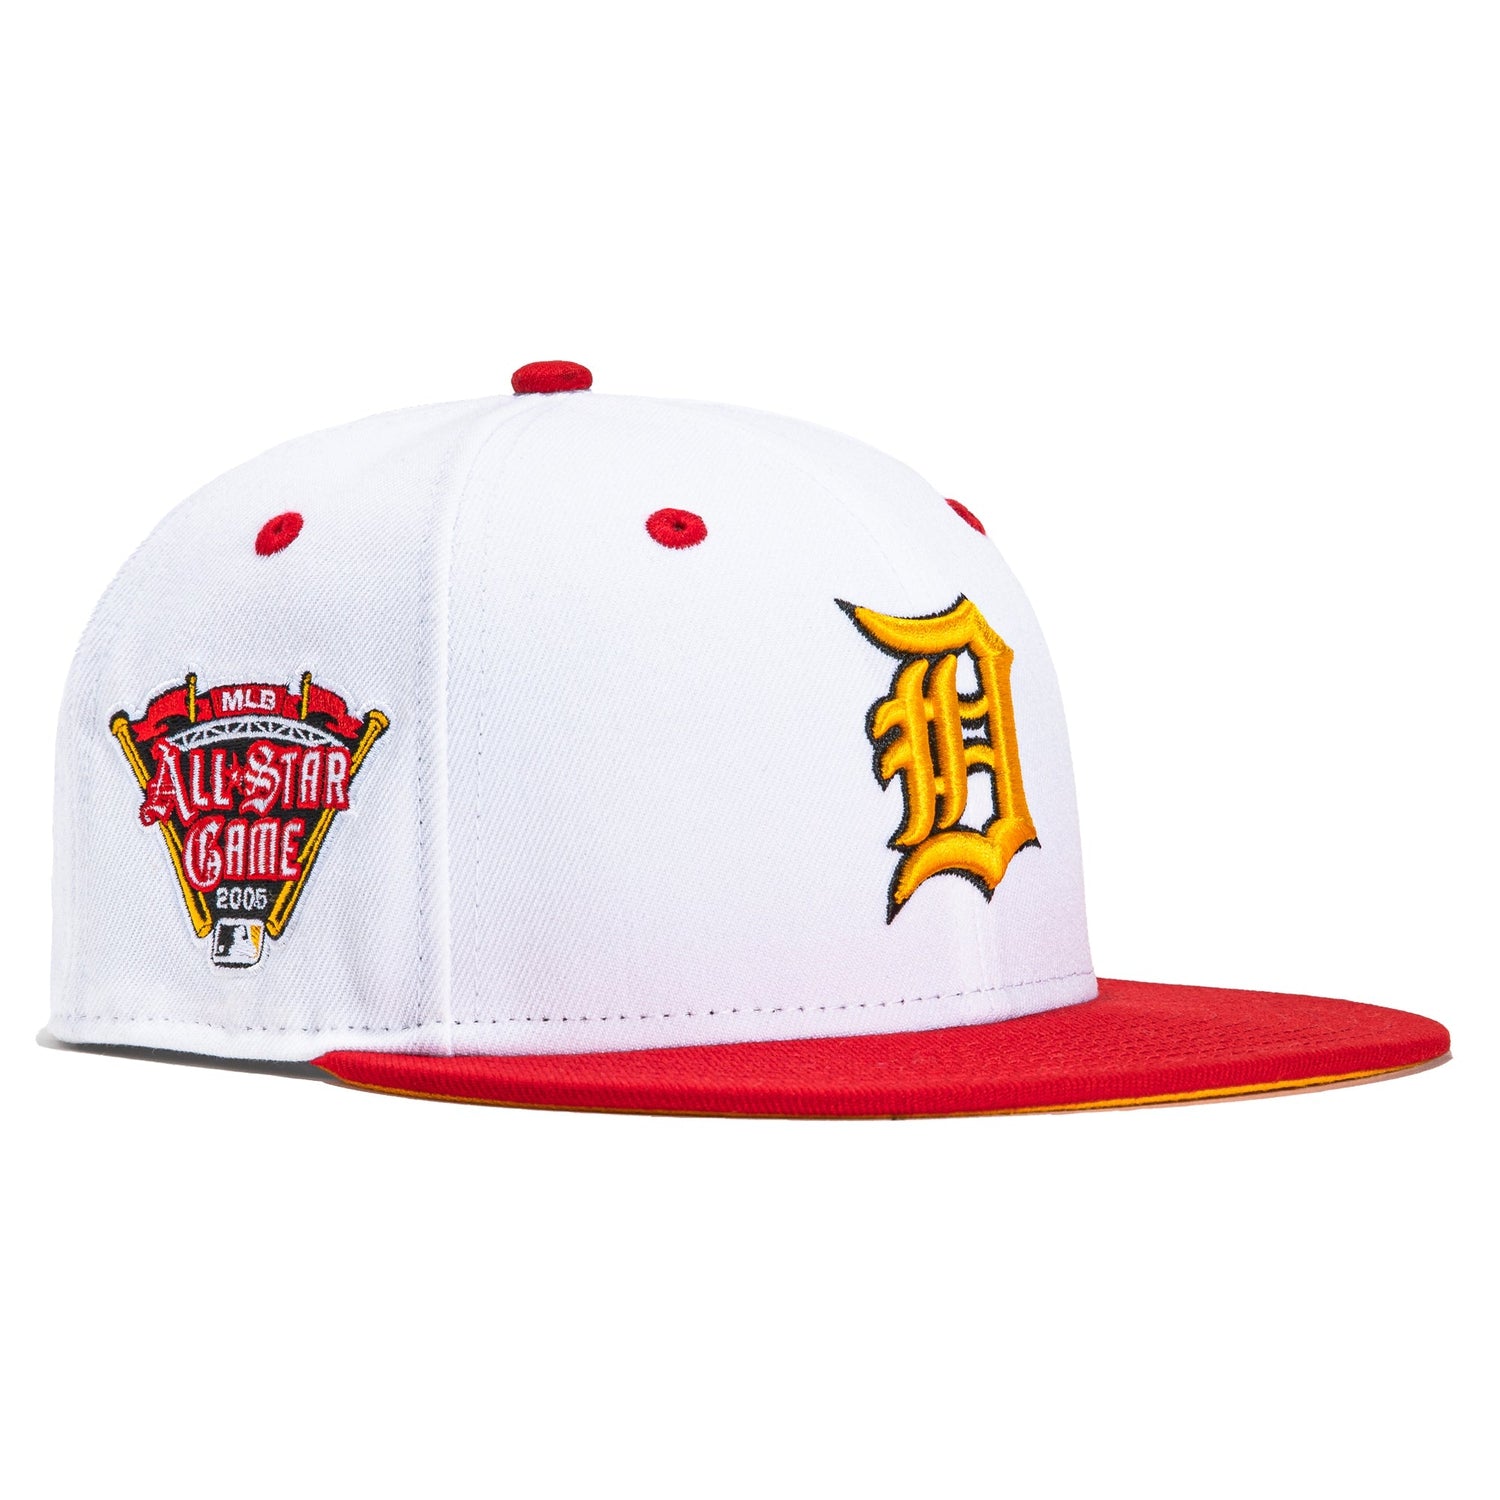 New Era 59FIFTY Aux Pack Detroit Tigers 2005 All Star Game Patch Hat - White, Red White/Red / 7 1/8